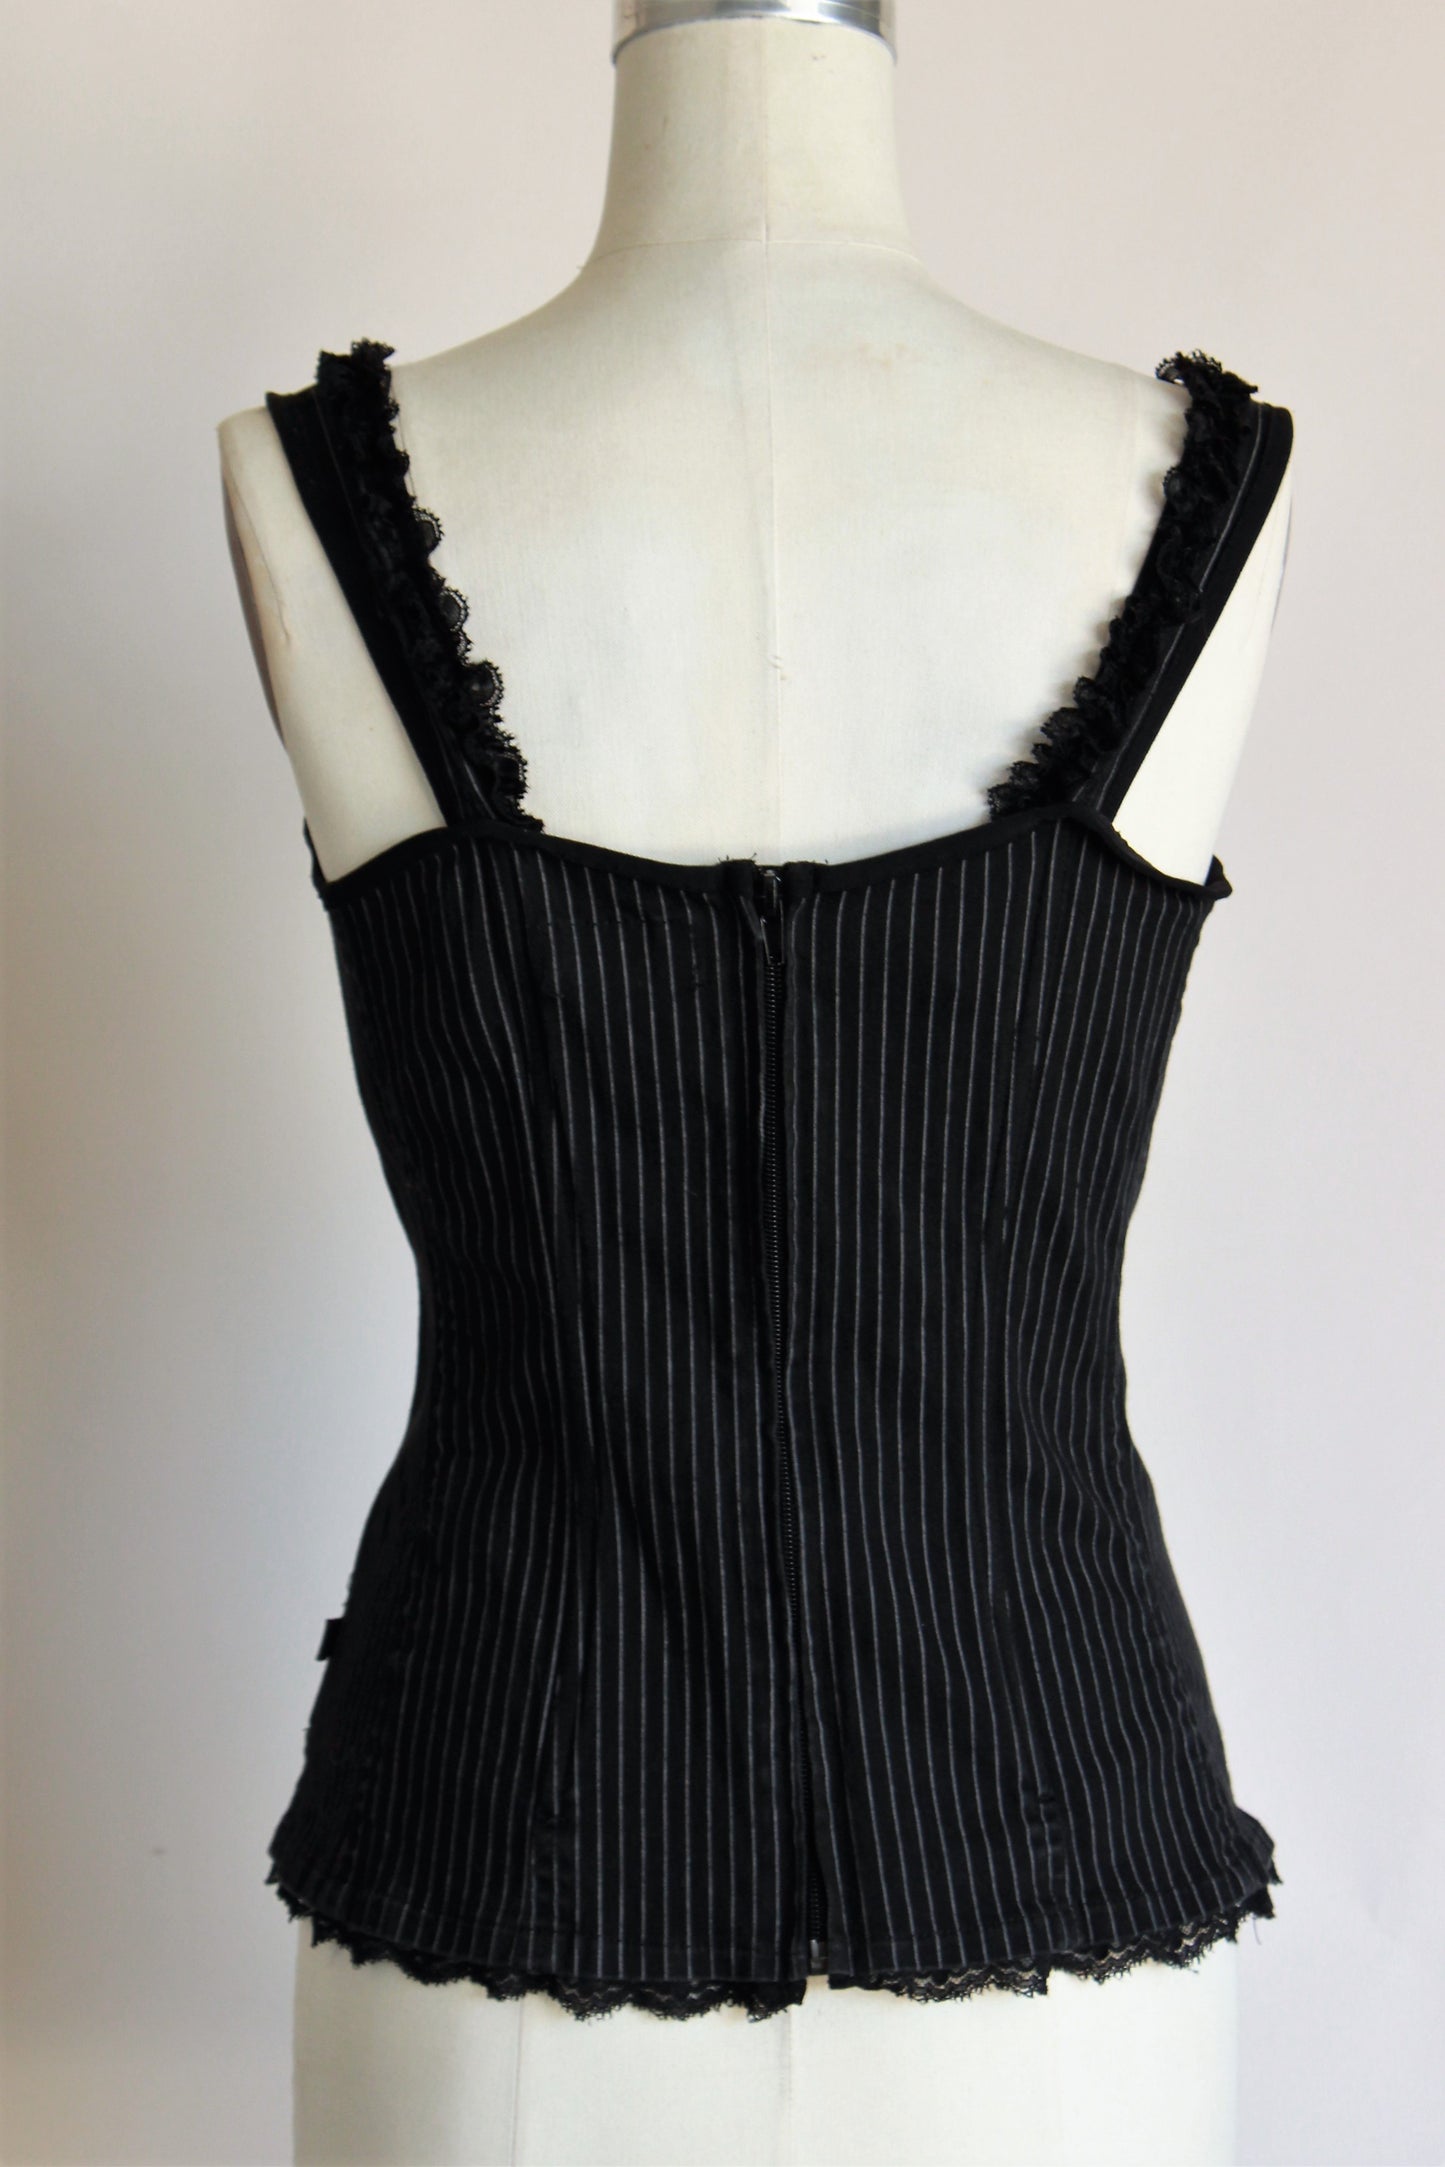 Tripp NYC Corset Style Top, Size Large